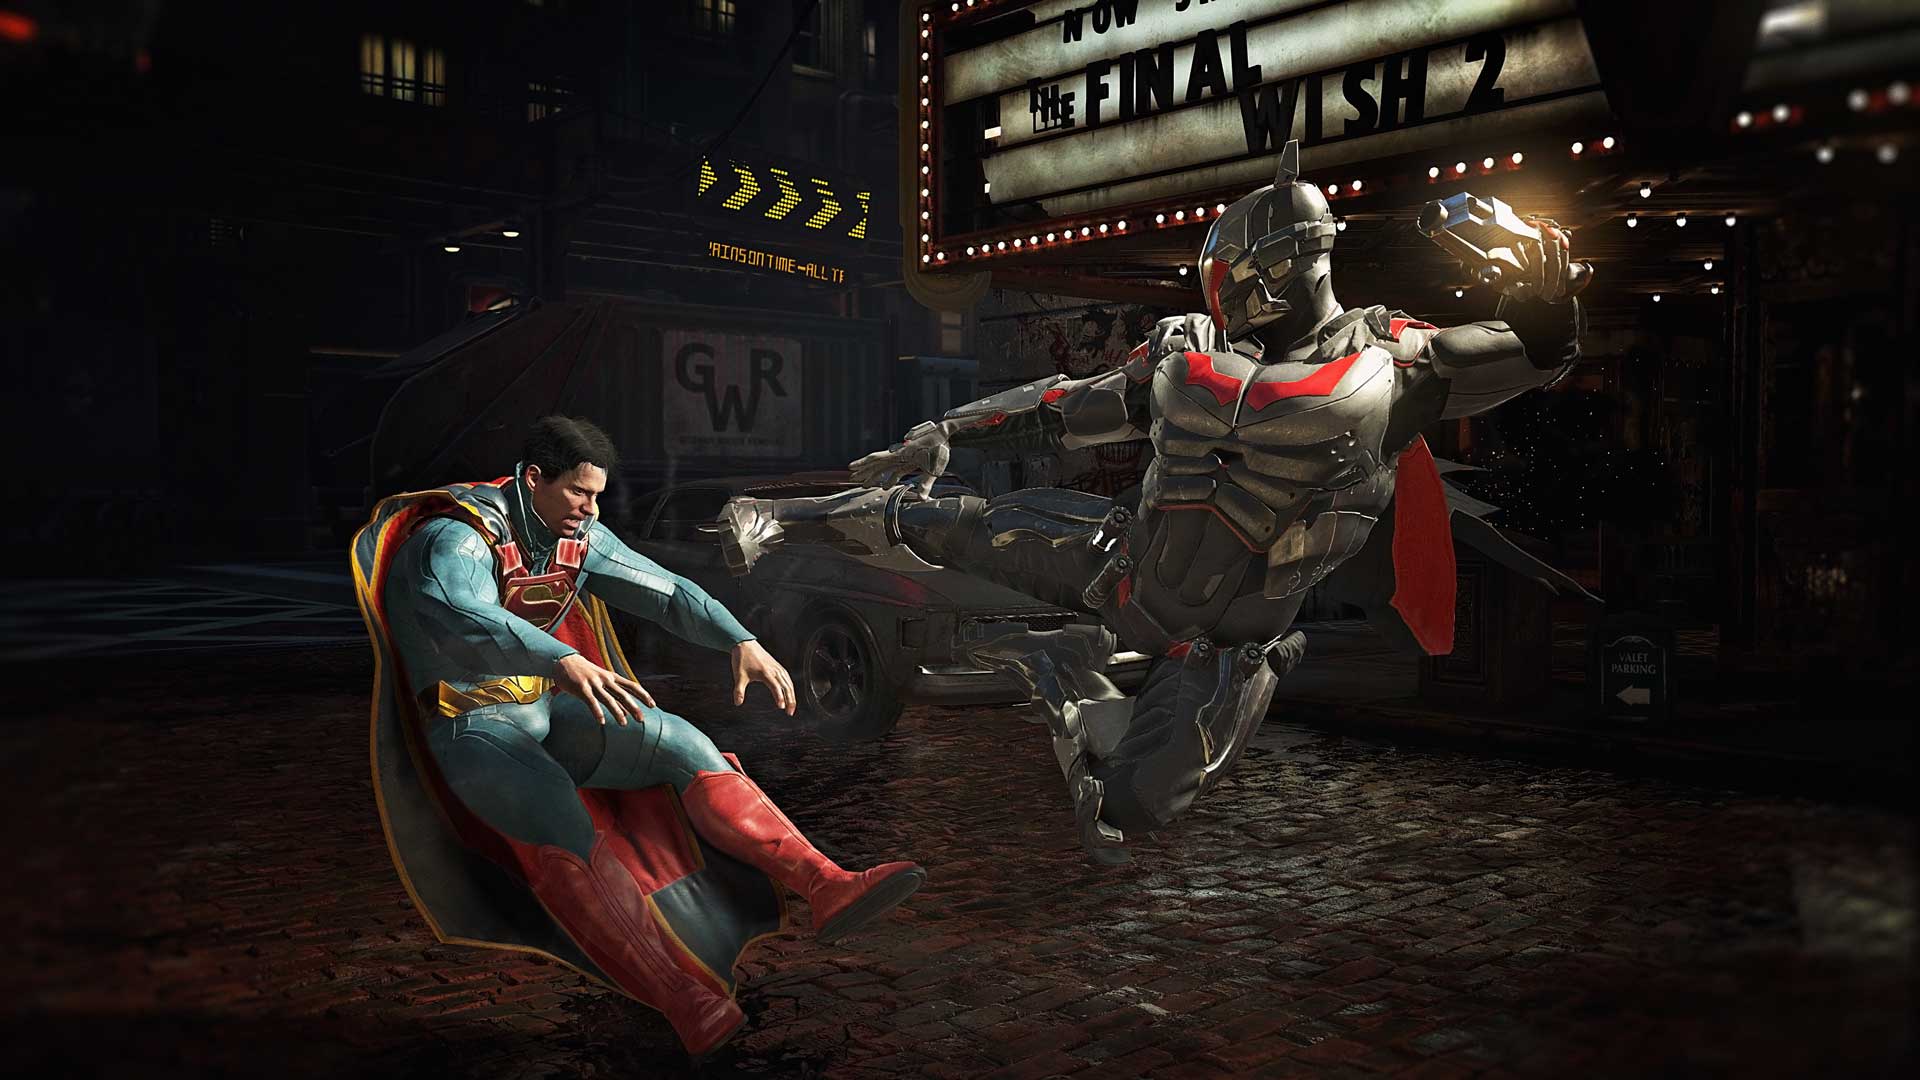 injustice gods among us ps4 store